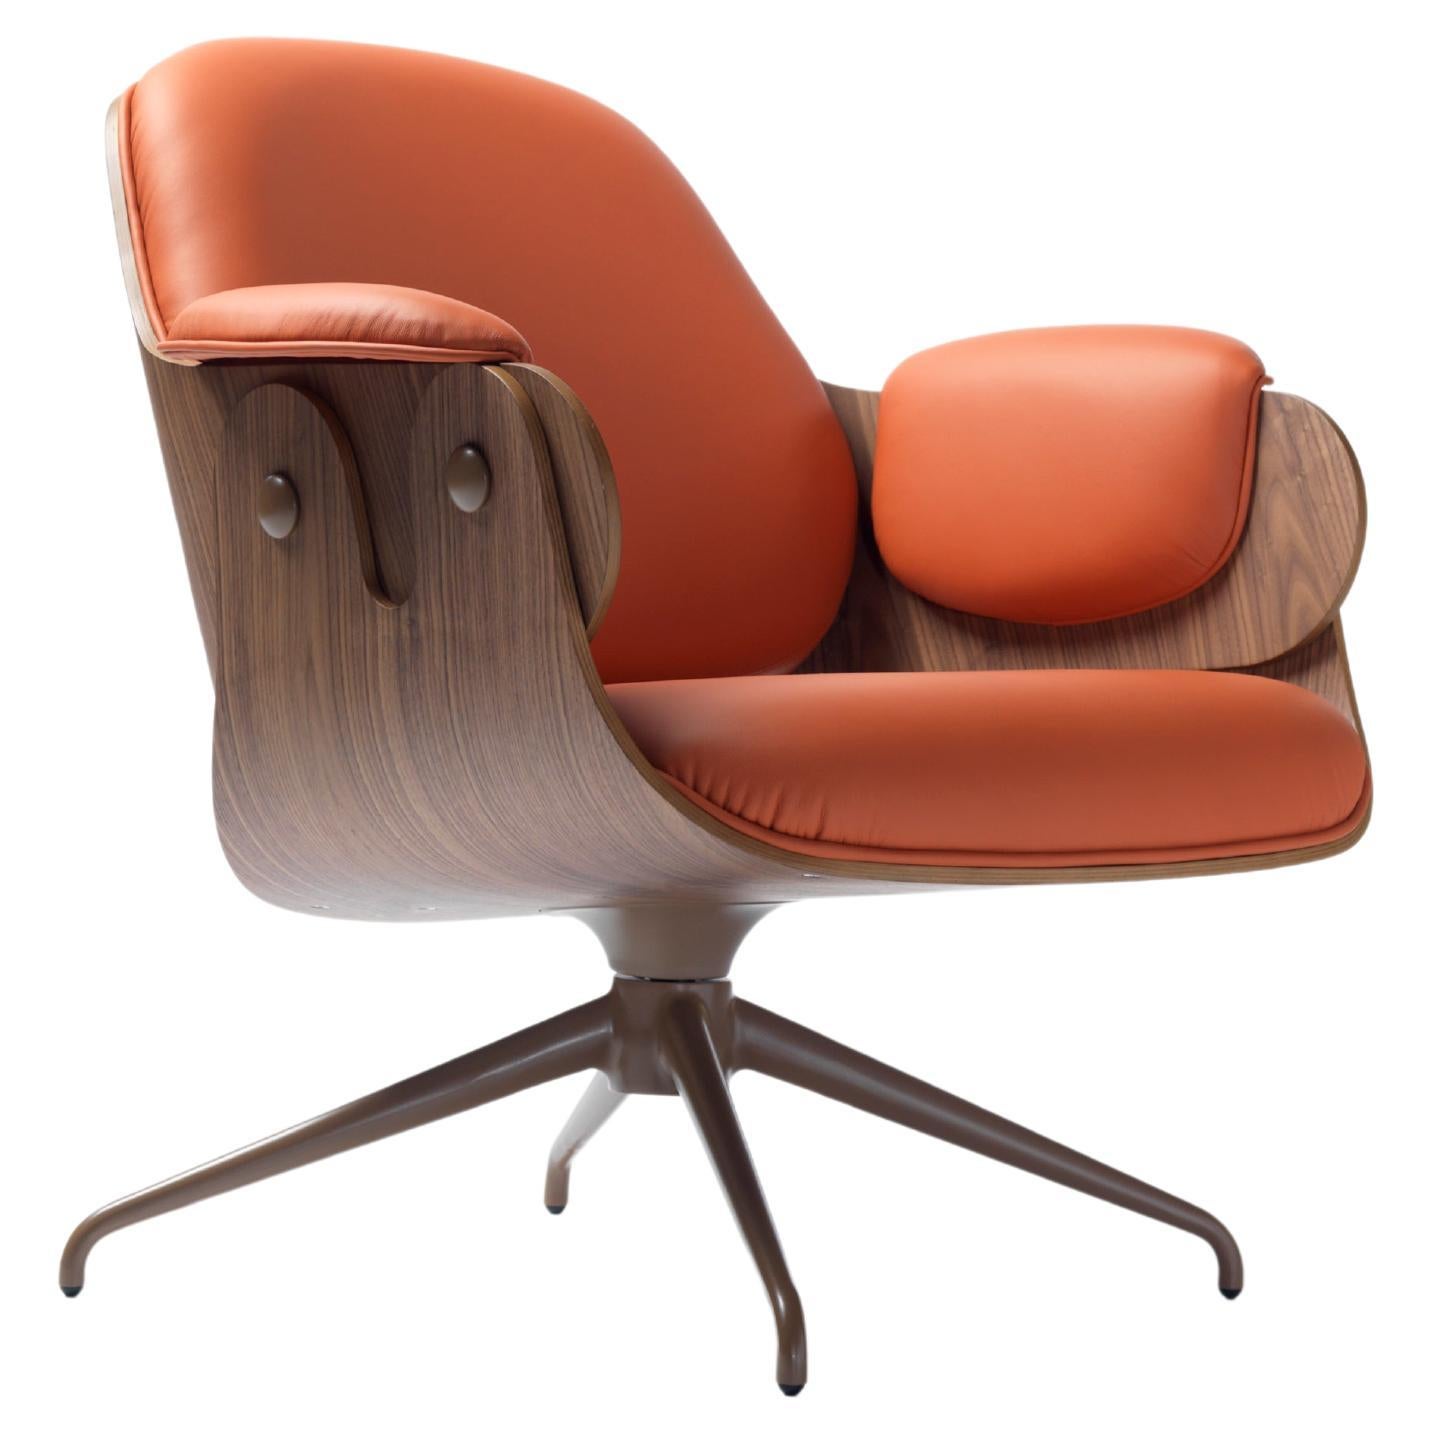 Low Lounger armchair chair on swivel base by Jaime Hayon organe leather, walnut 